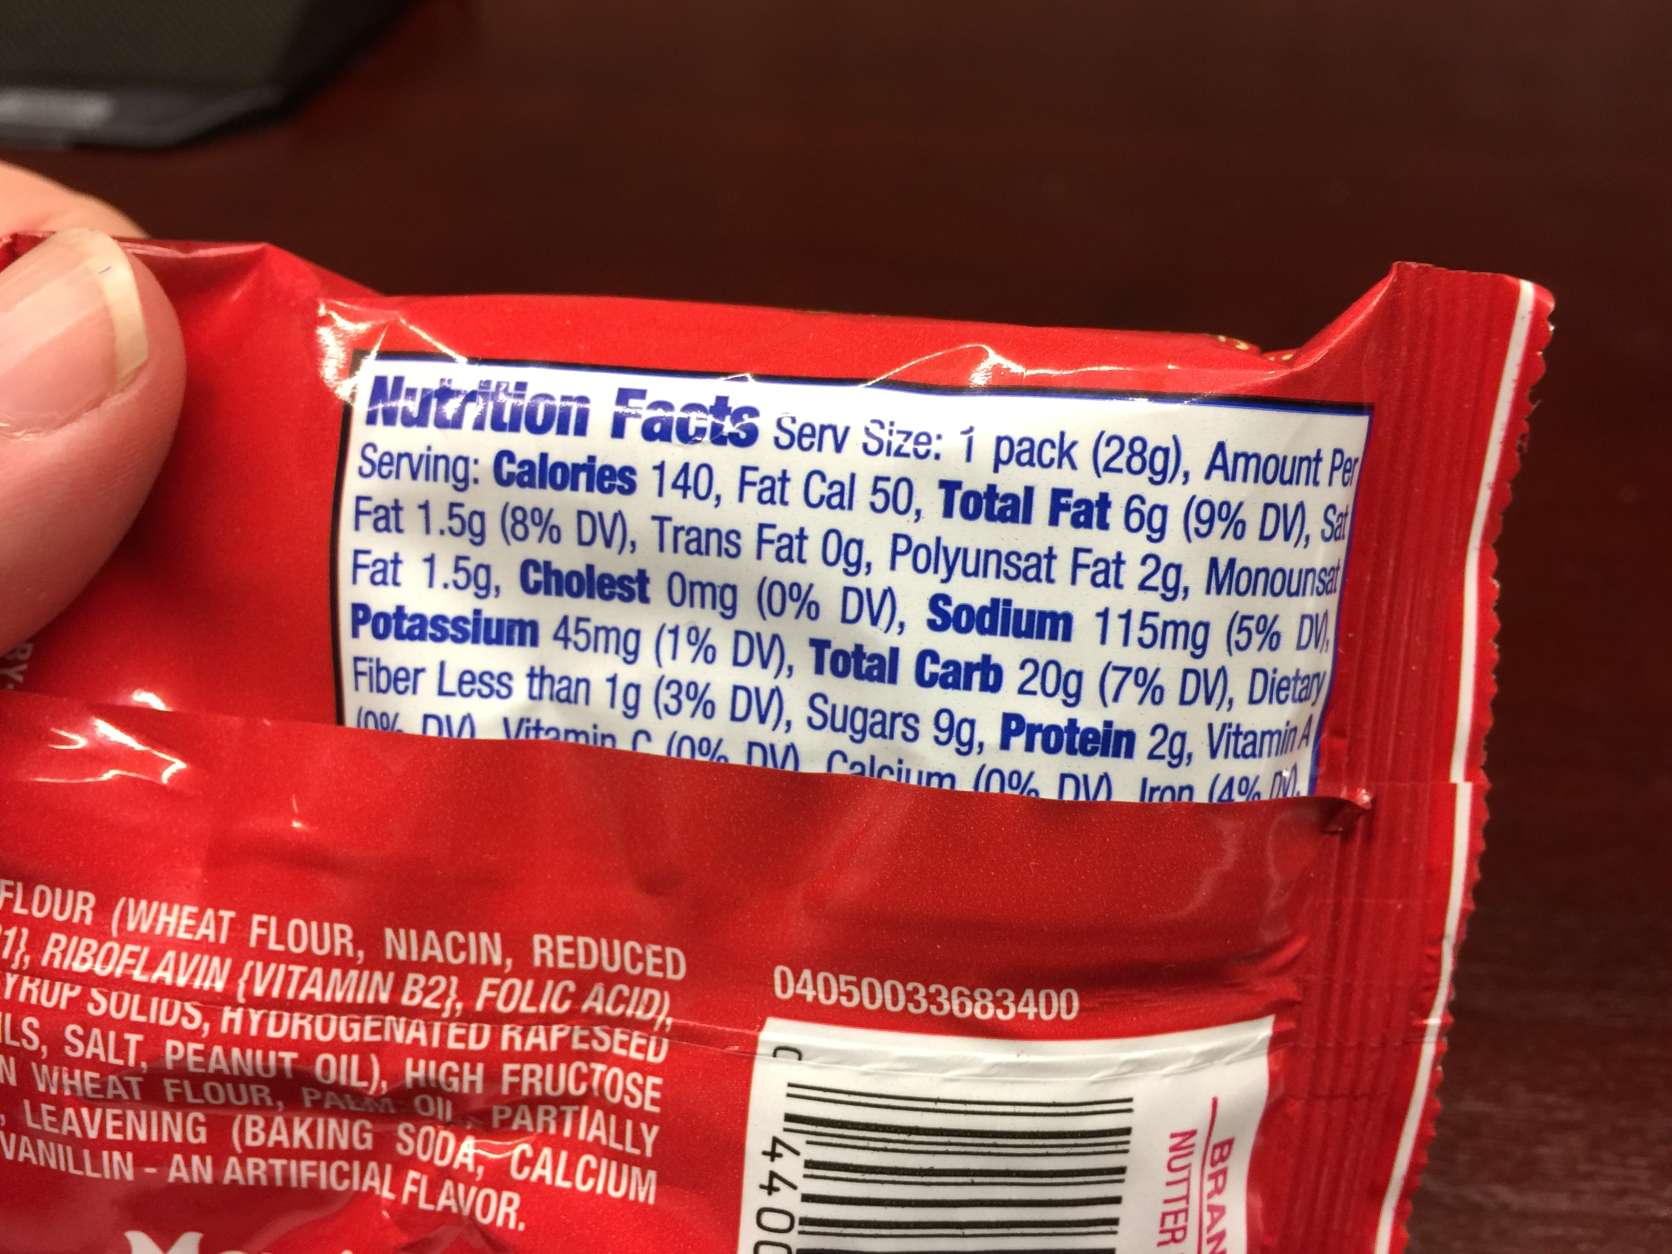 As packaged, Nutter Butter peanut butter bites contain 140 calories and would be acceptable as a more healthy option for Montgomery County vending machines. (WTOP/Kristi King)